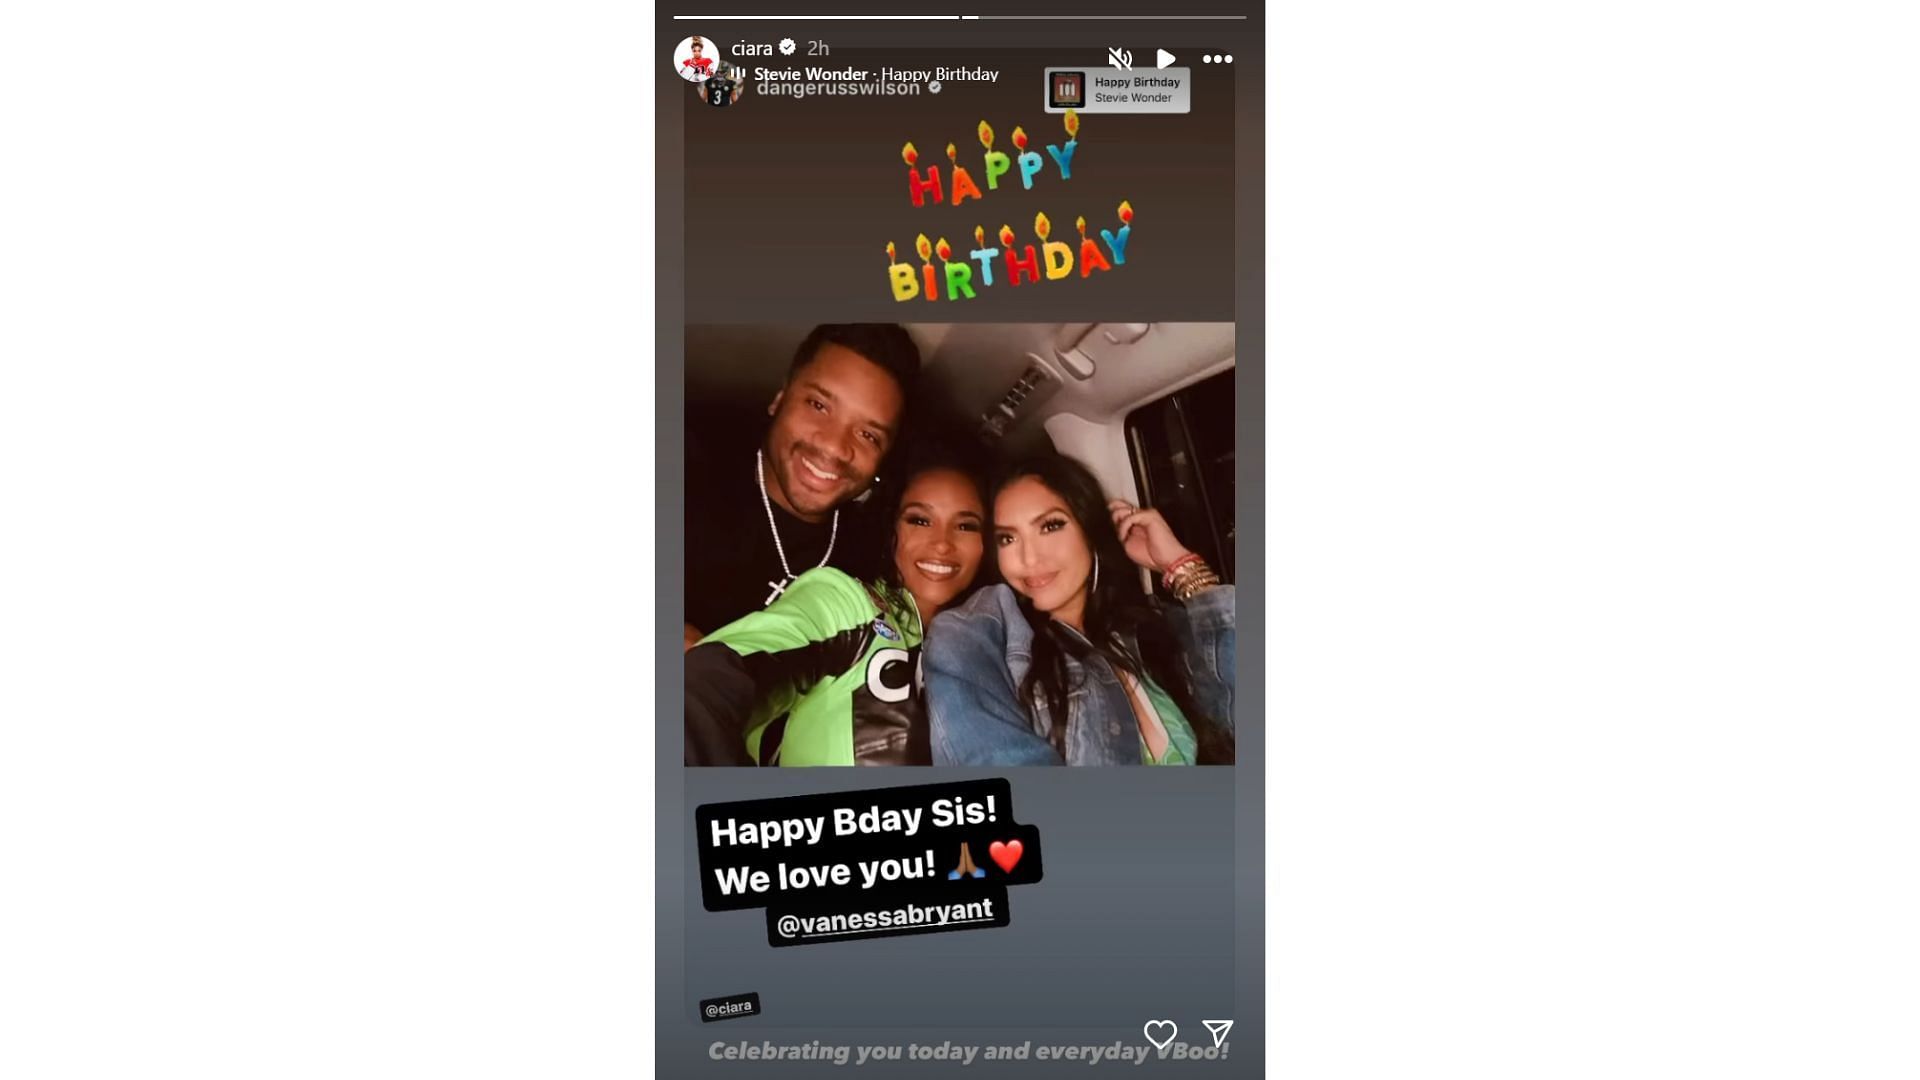 Russell Wilson and wife Ciara wish Vanessa Bryant for her birthday (From: @ciara IG)